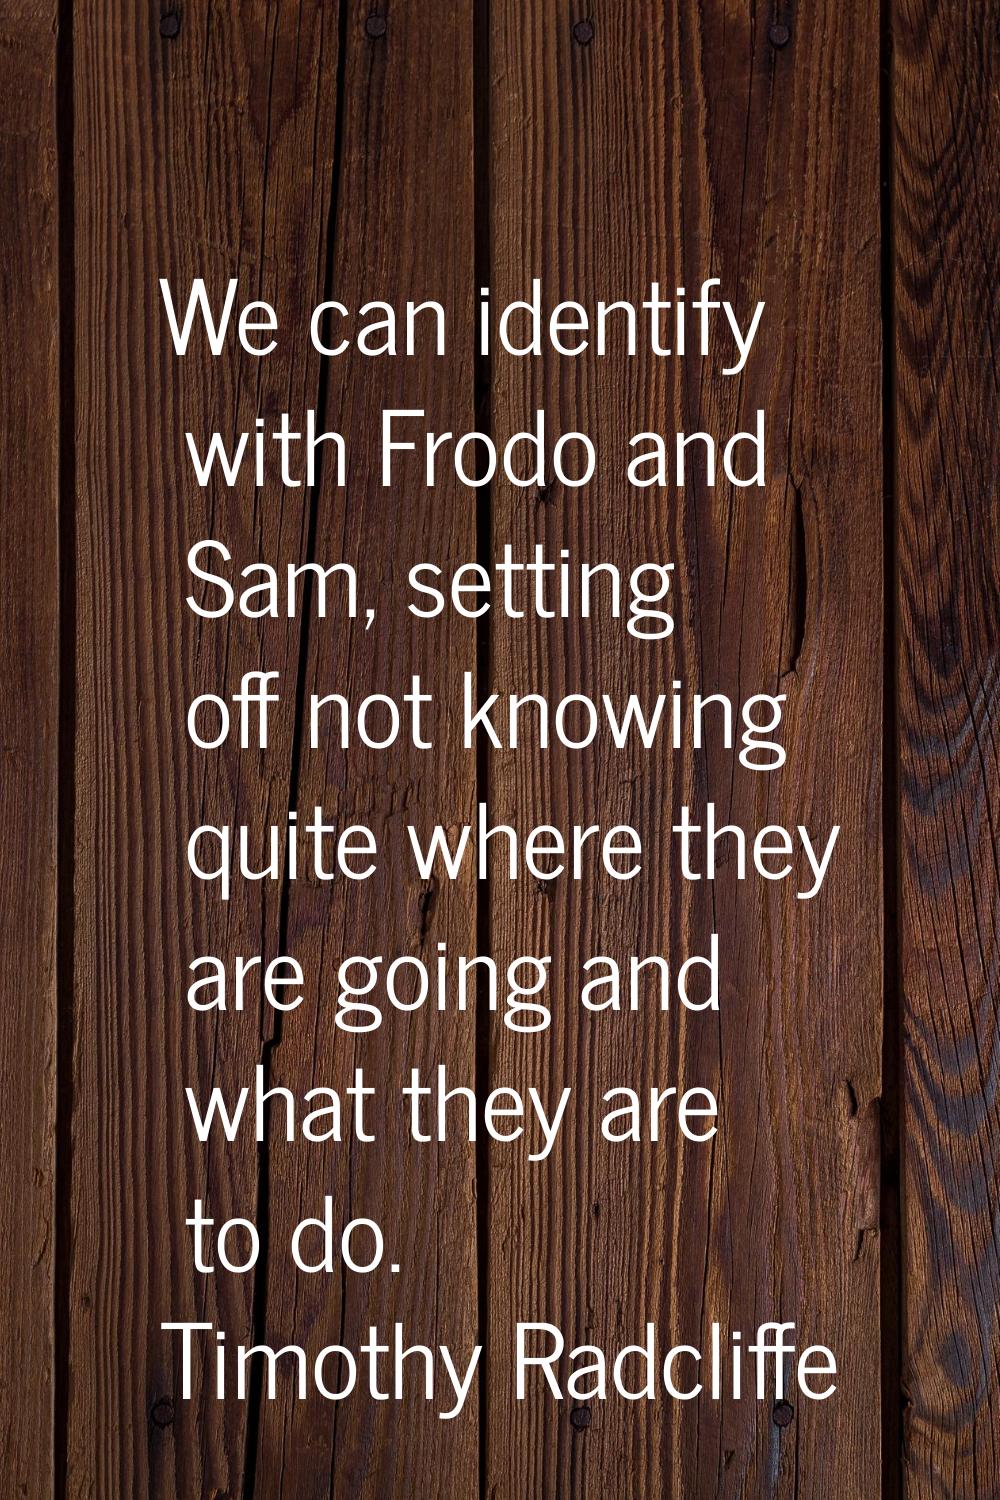 We can identify with Frodo and Sam, setting off not knowing quite where they are going and what the